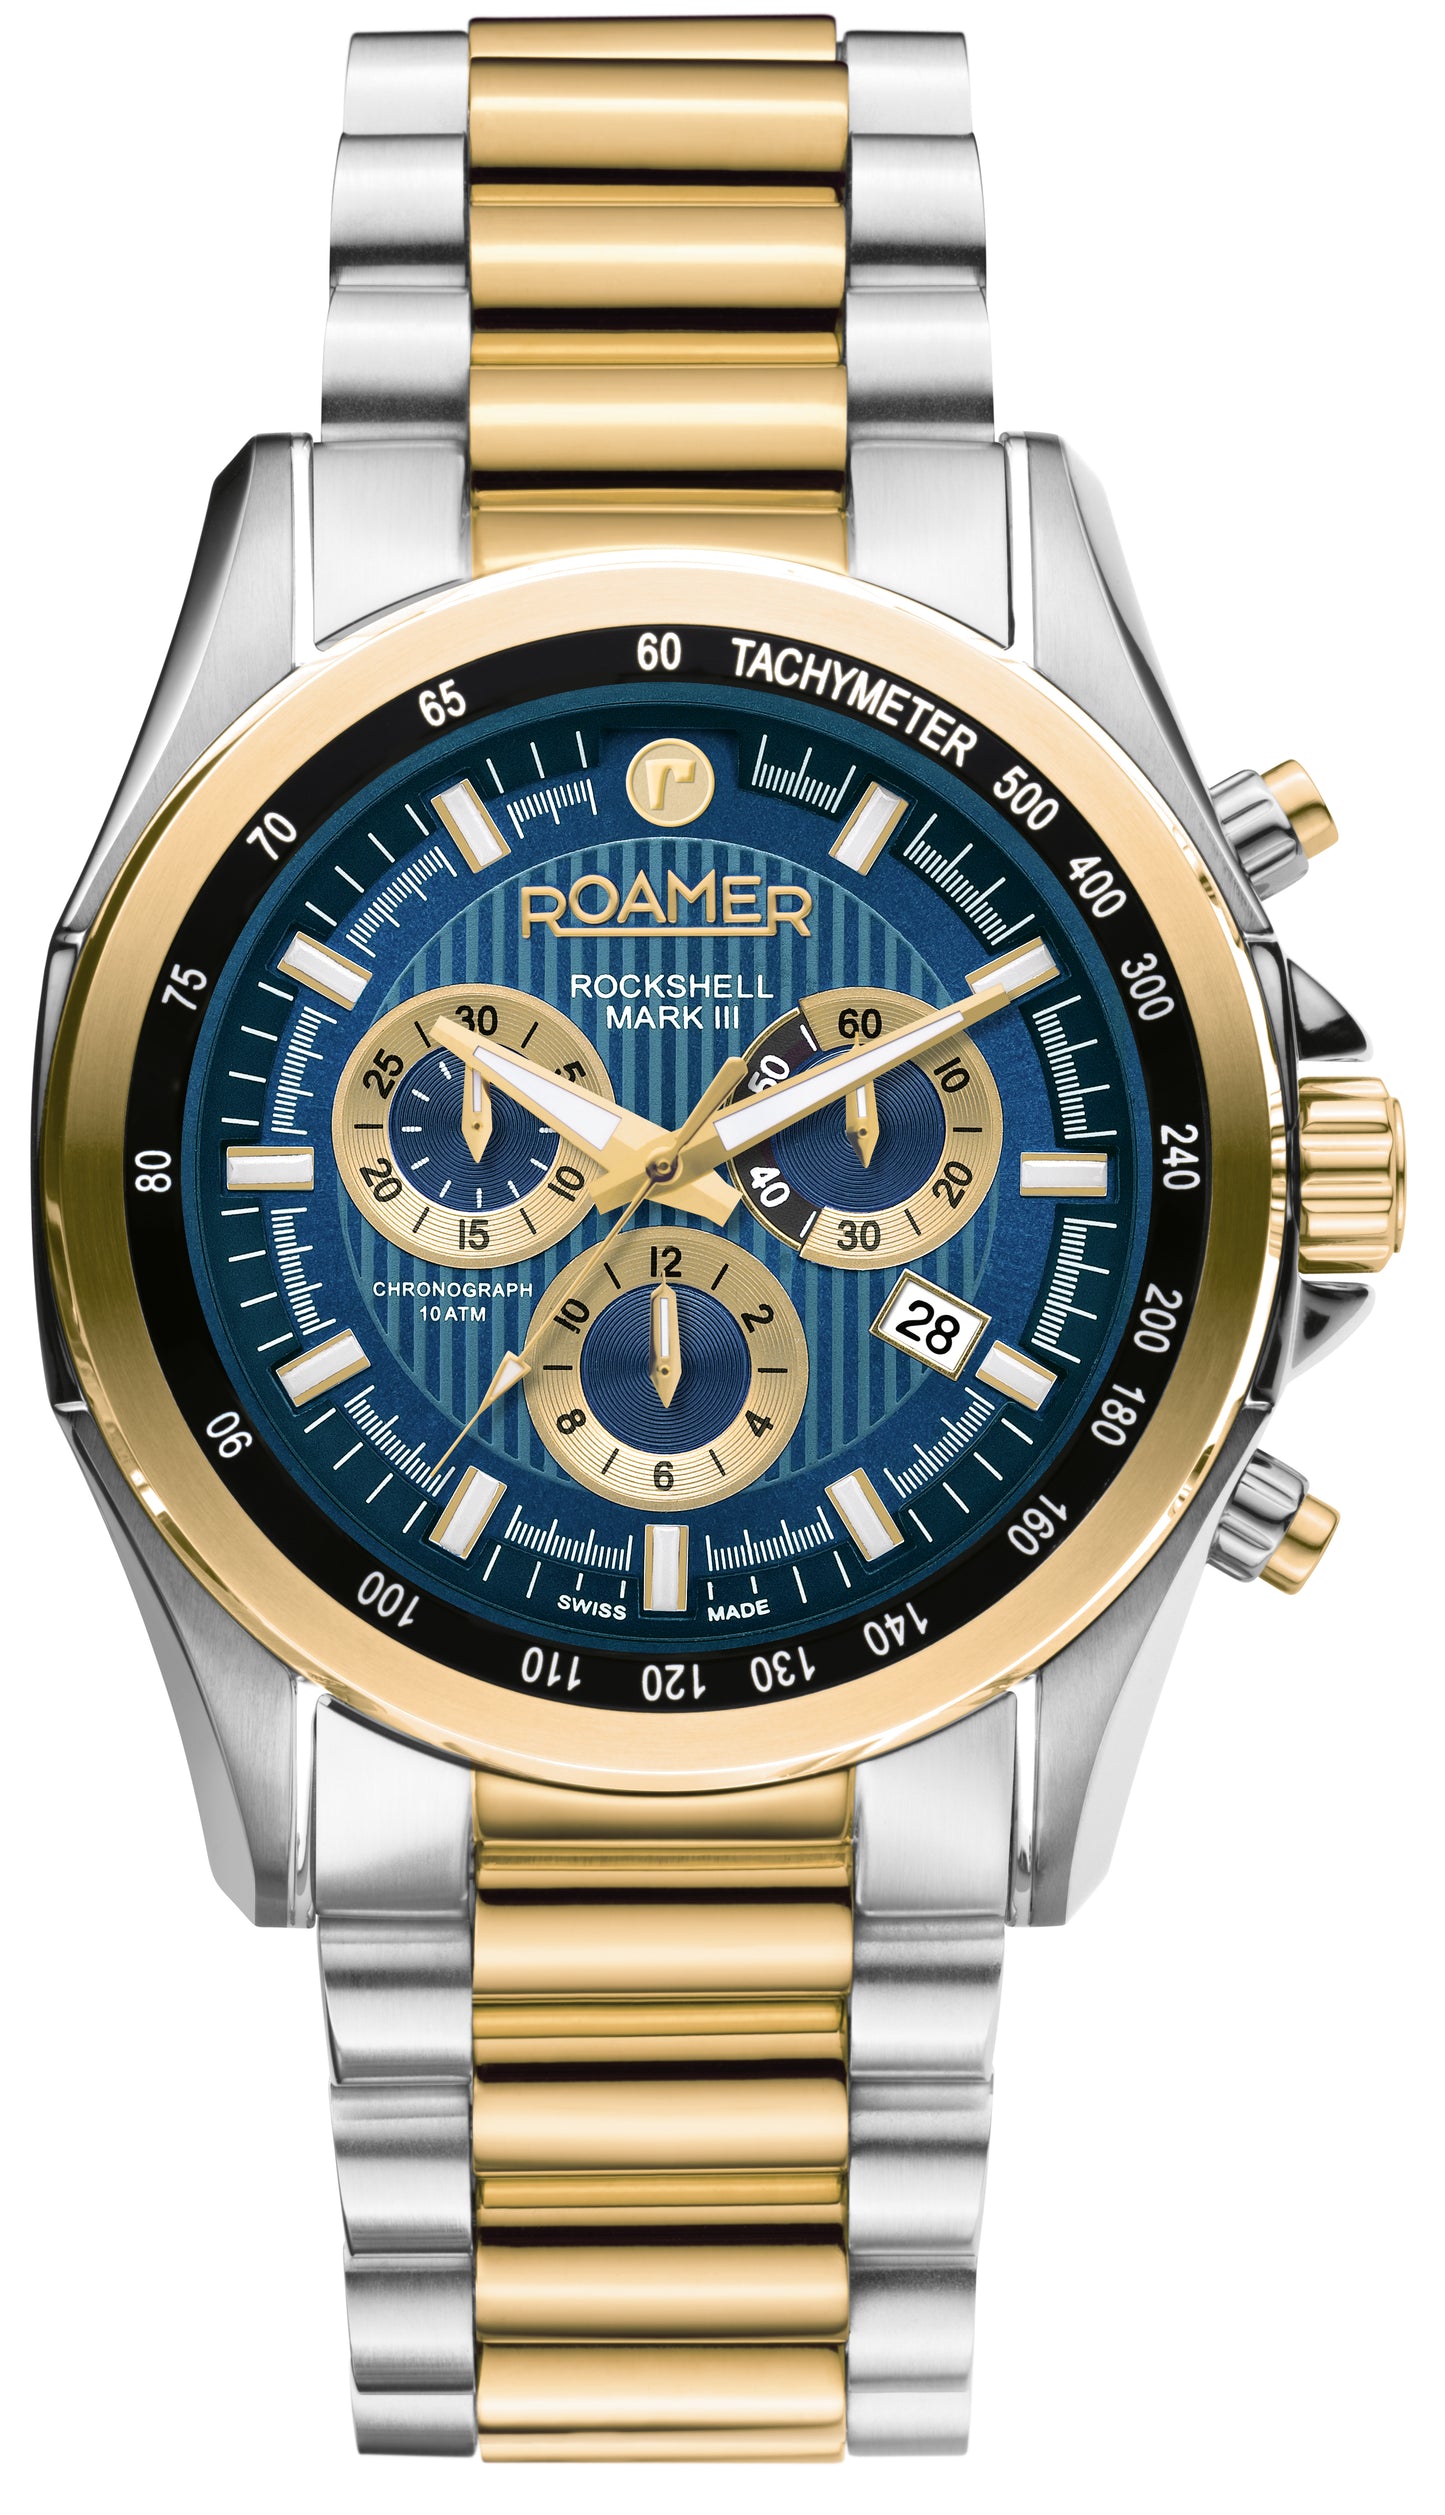 Roamer Rockshell Mark III Chrono Blue Dial Yellow Gold Bi-colour Bracelet with Gold Accents